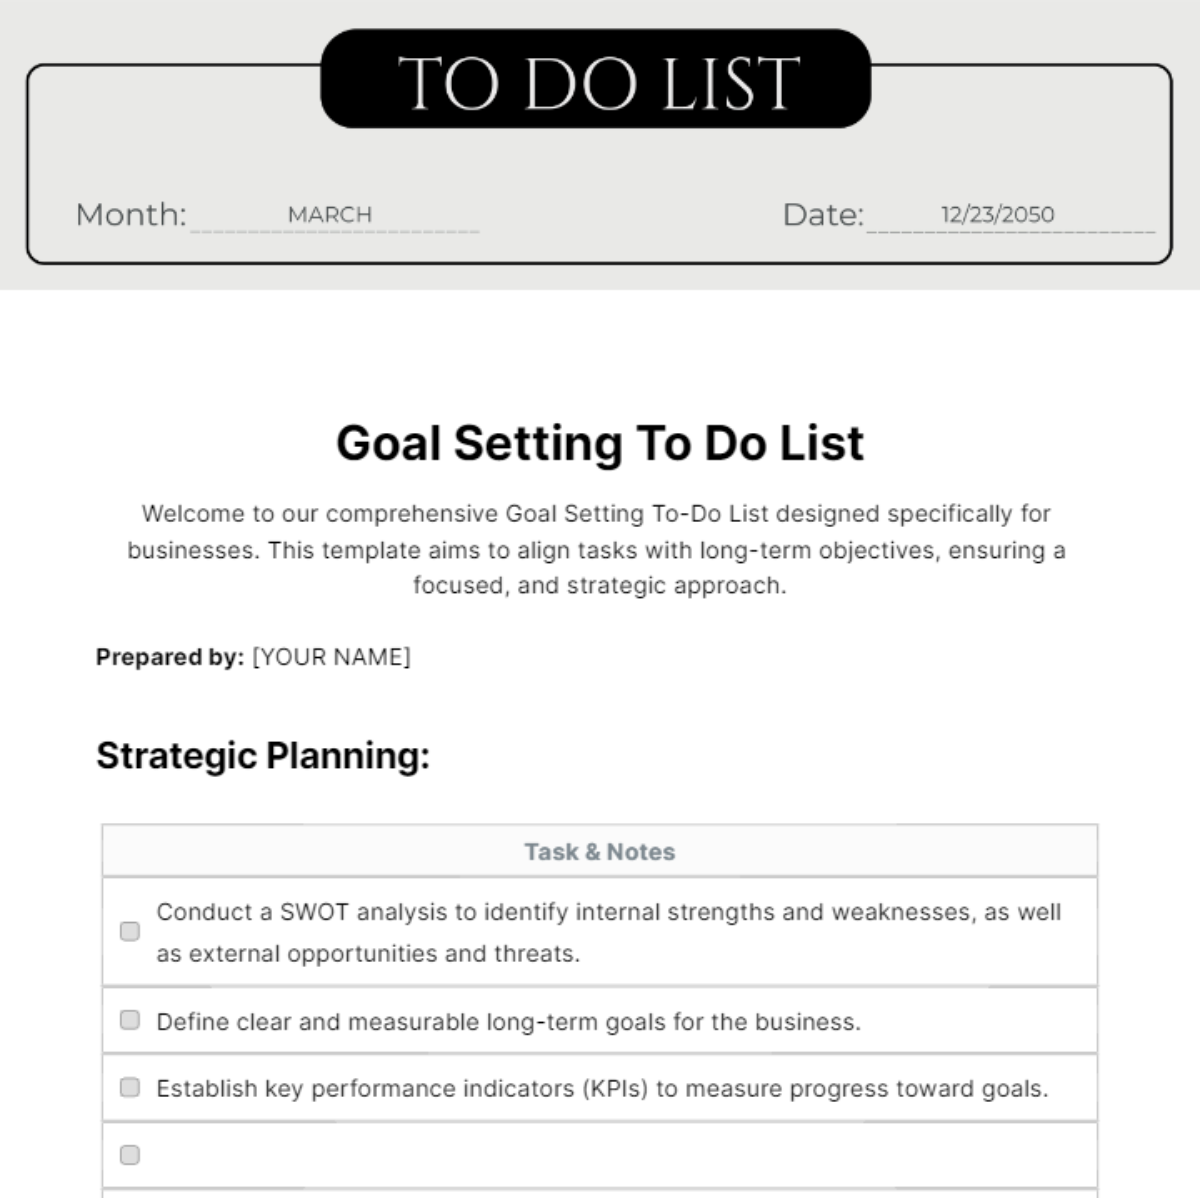 Goal Setting To Do List Template